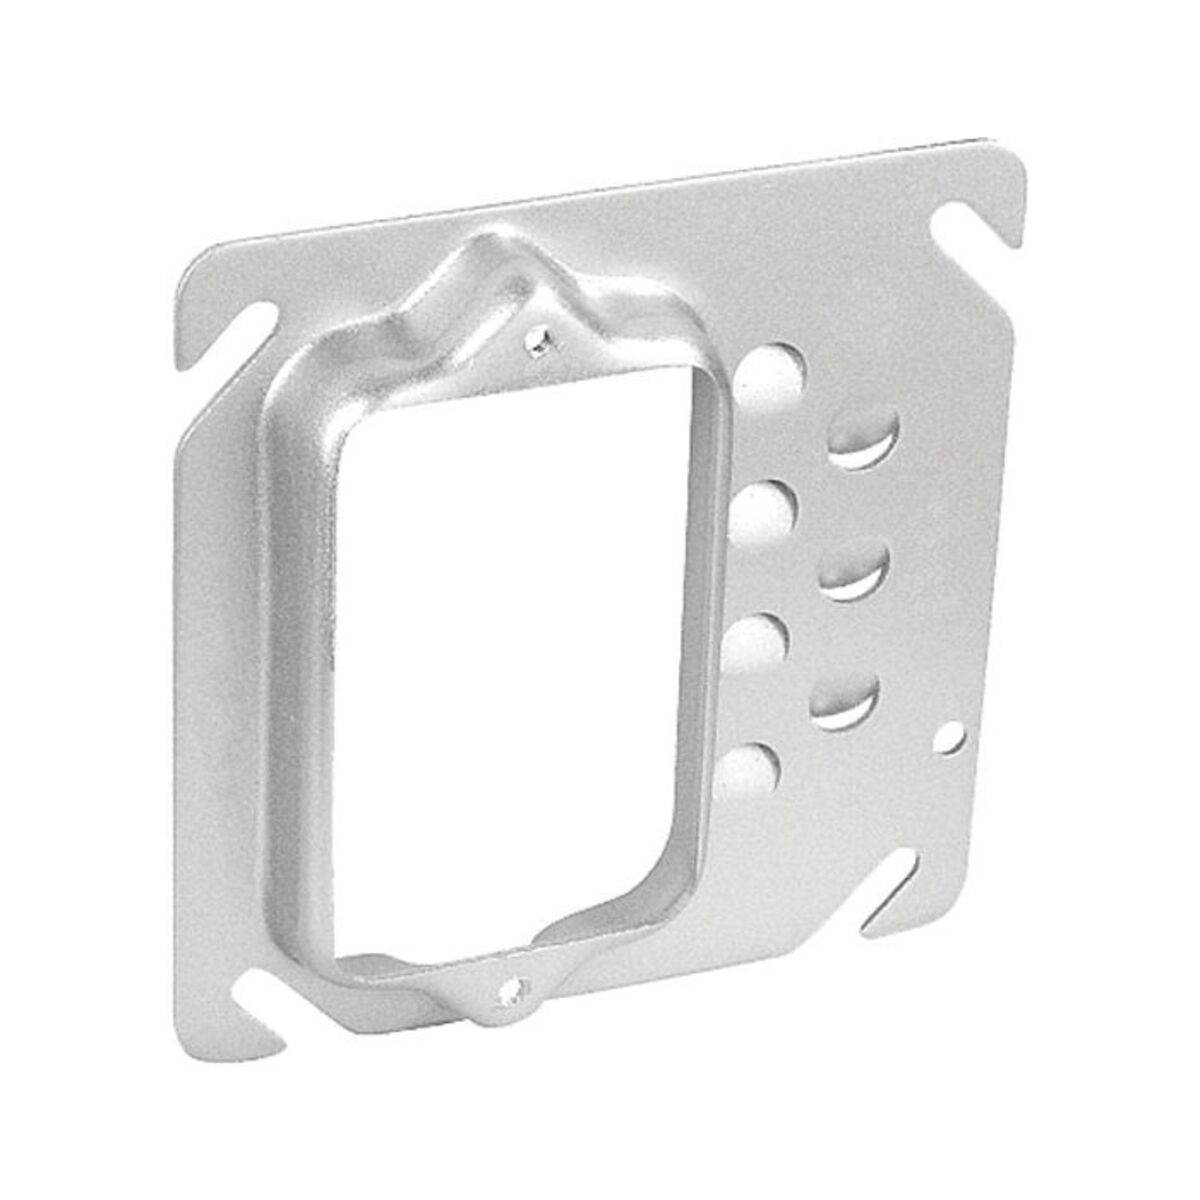 4" Square Single Gang Offset Device Ring - Raised 3/4"